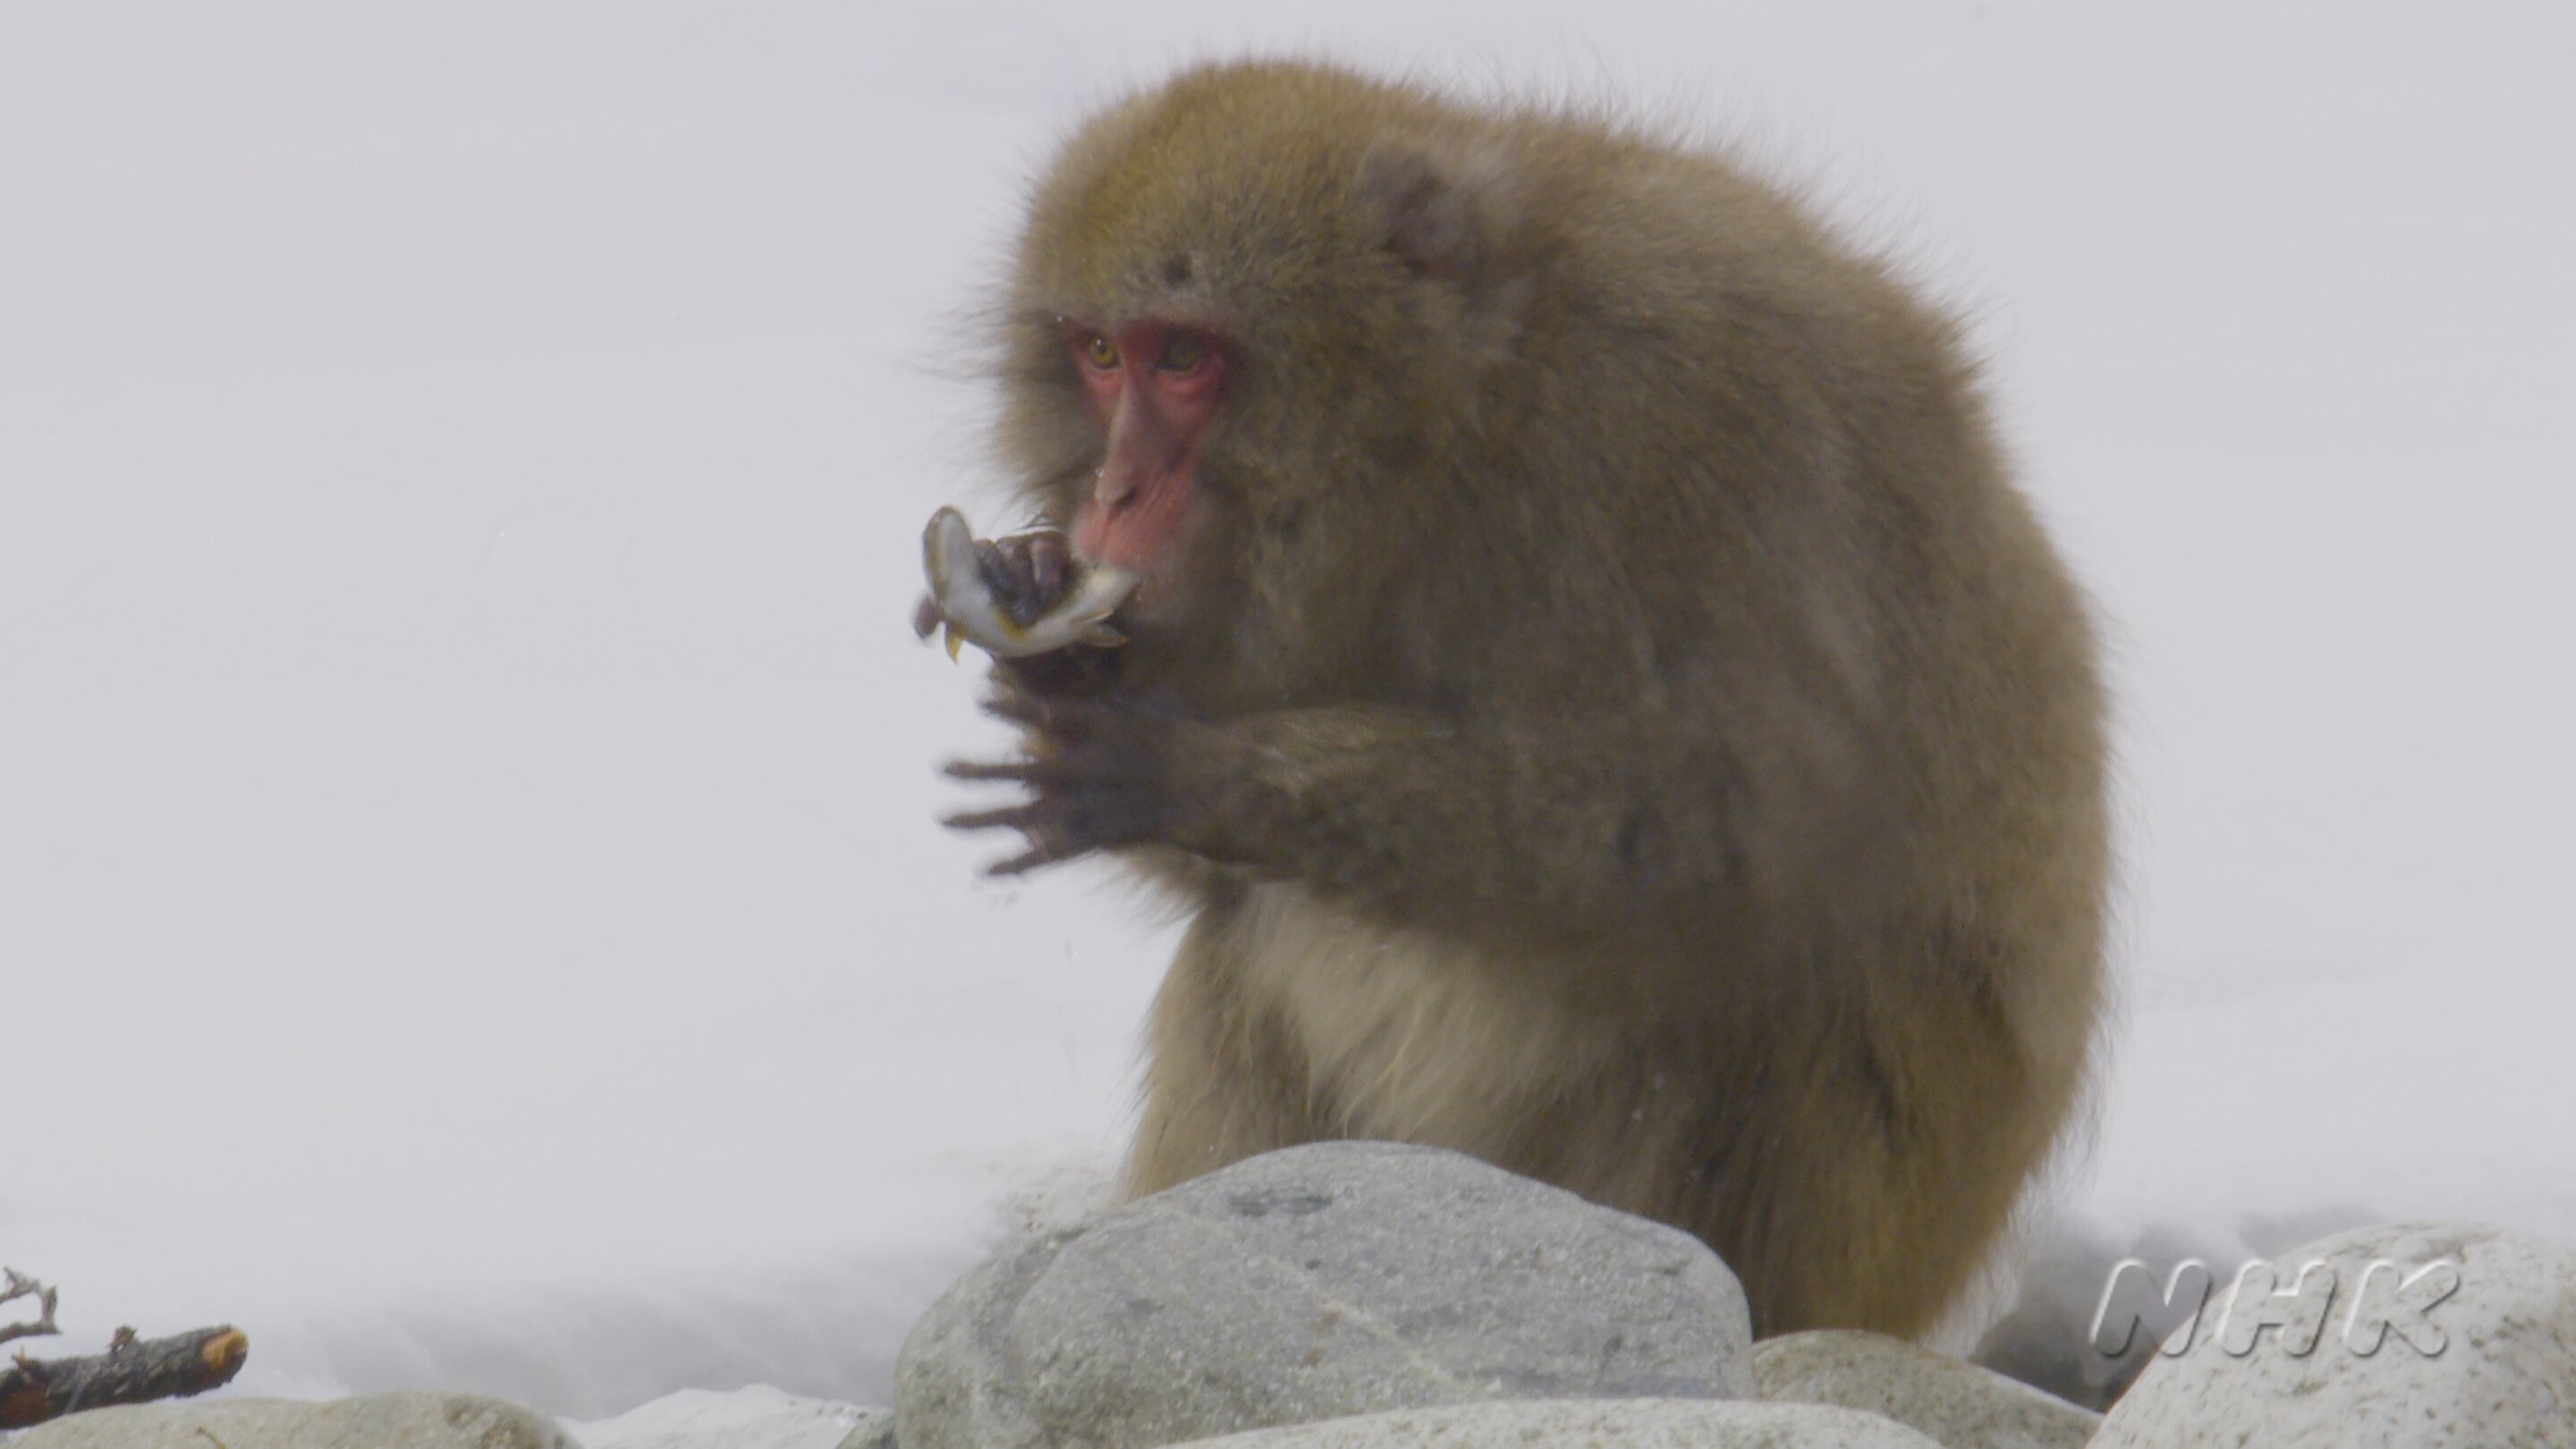 Fish-hunting and eating behaviors confirmed in Japanese macaques